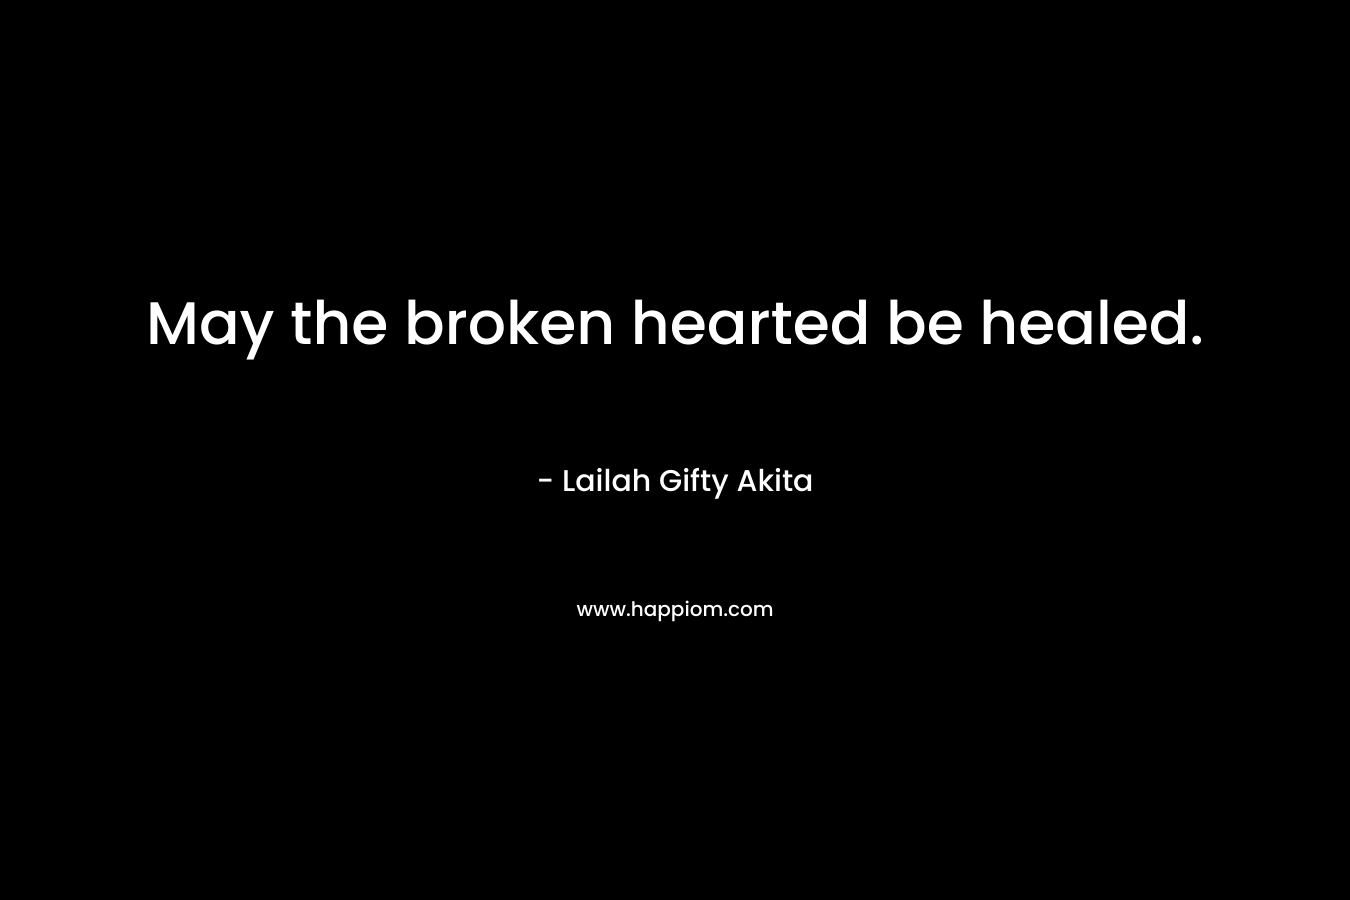 May the broken hearted be healed. – Lailah Gifty Akita